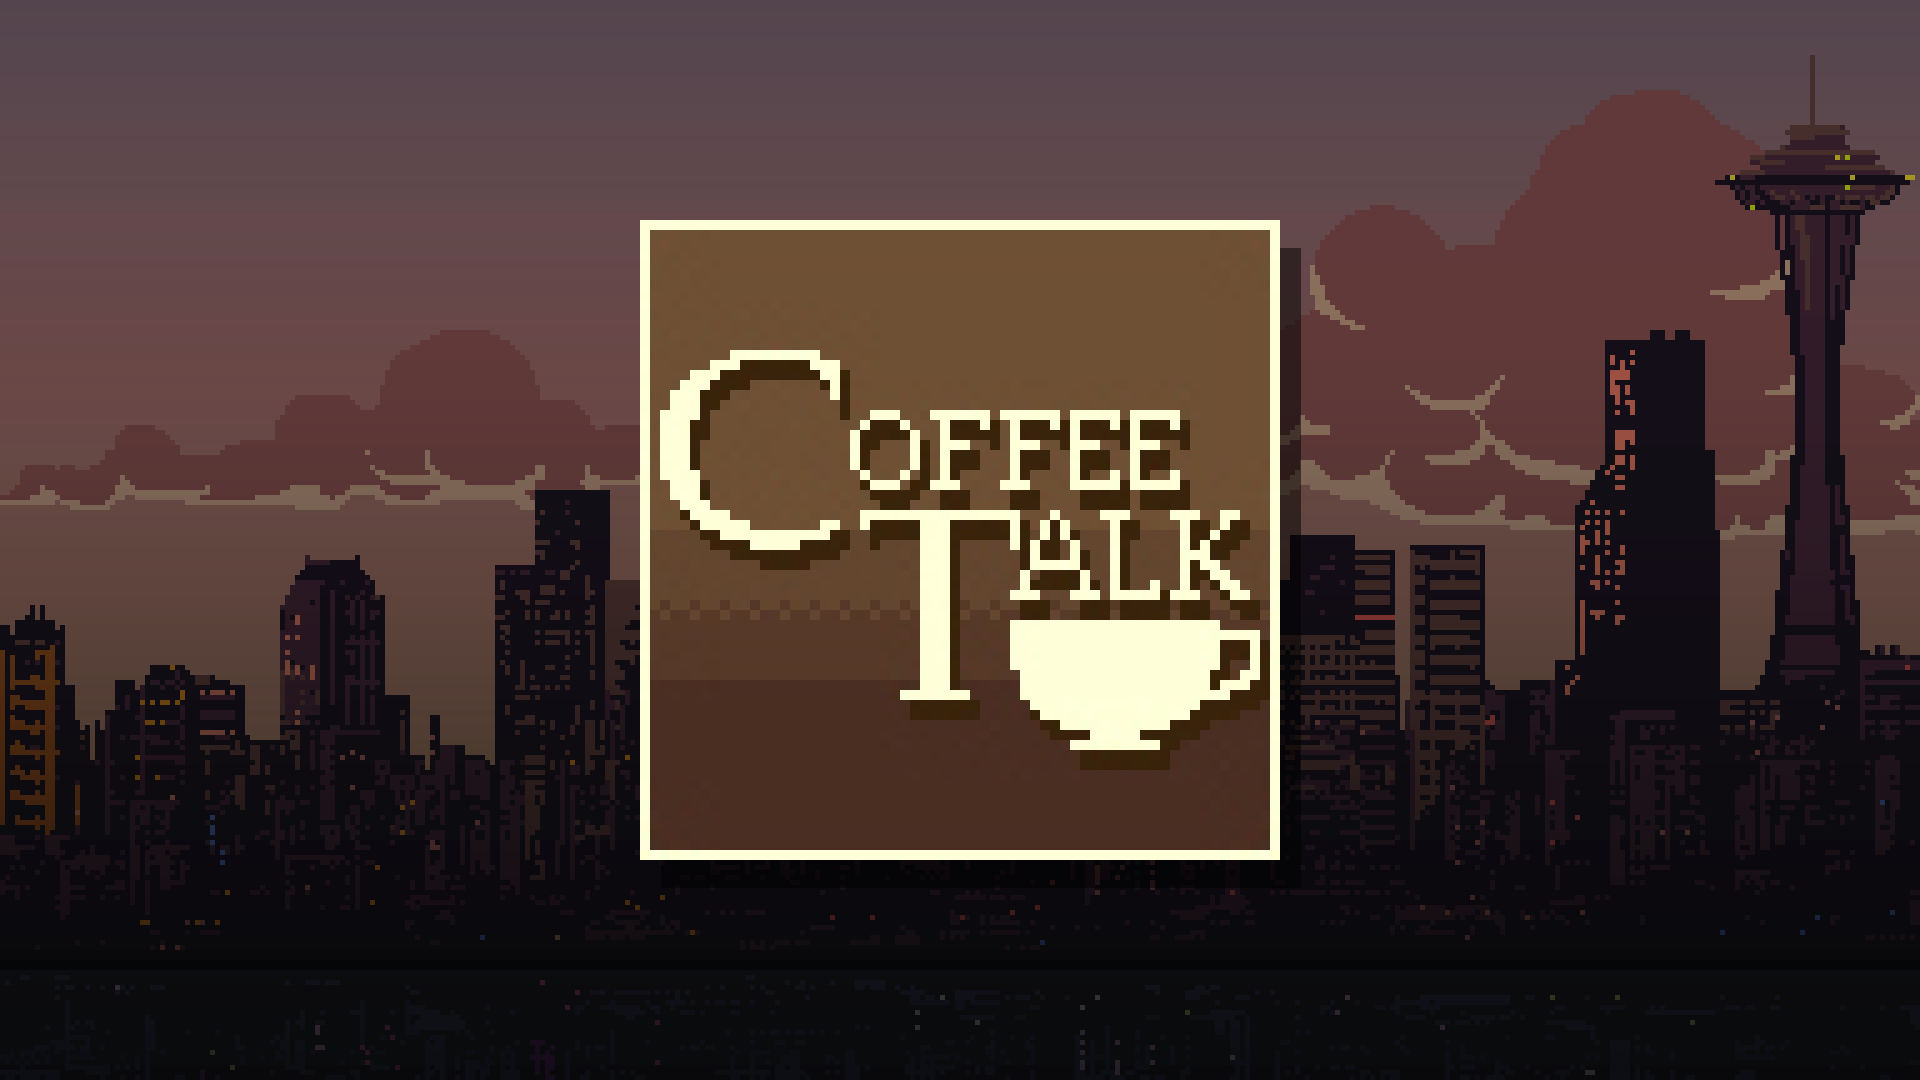 Icon for Welcome to Coffee Talk